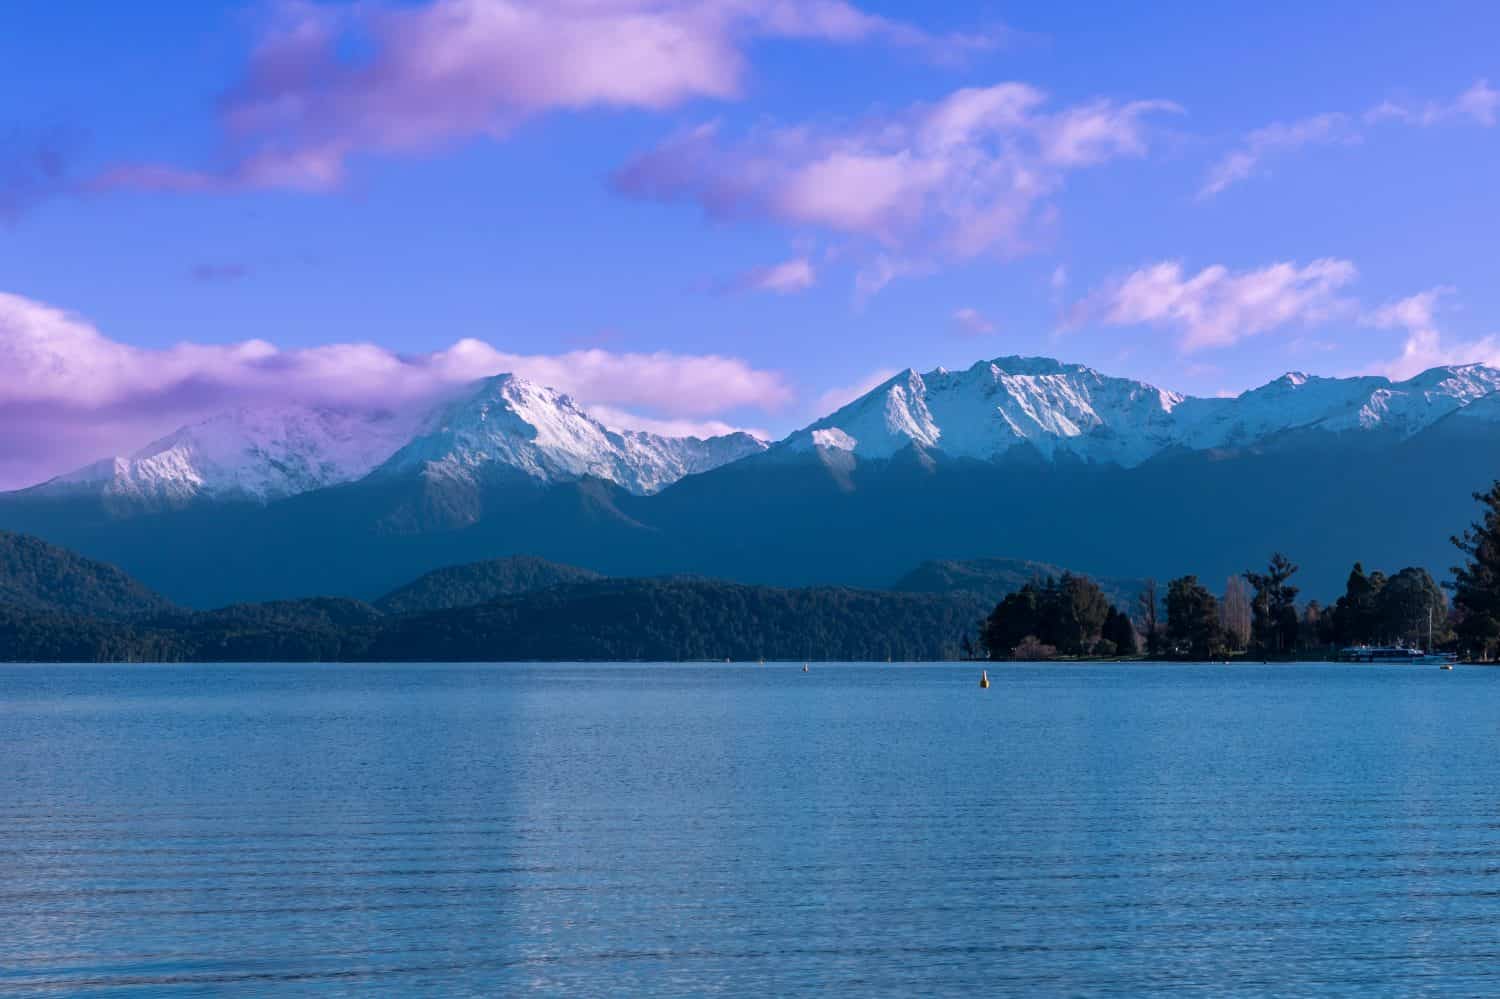 Photograph of Te Anau Lake in the township of Te Anau in Fiordland on the South Island of New Zealand